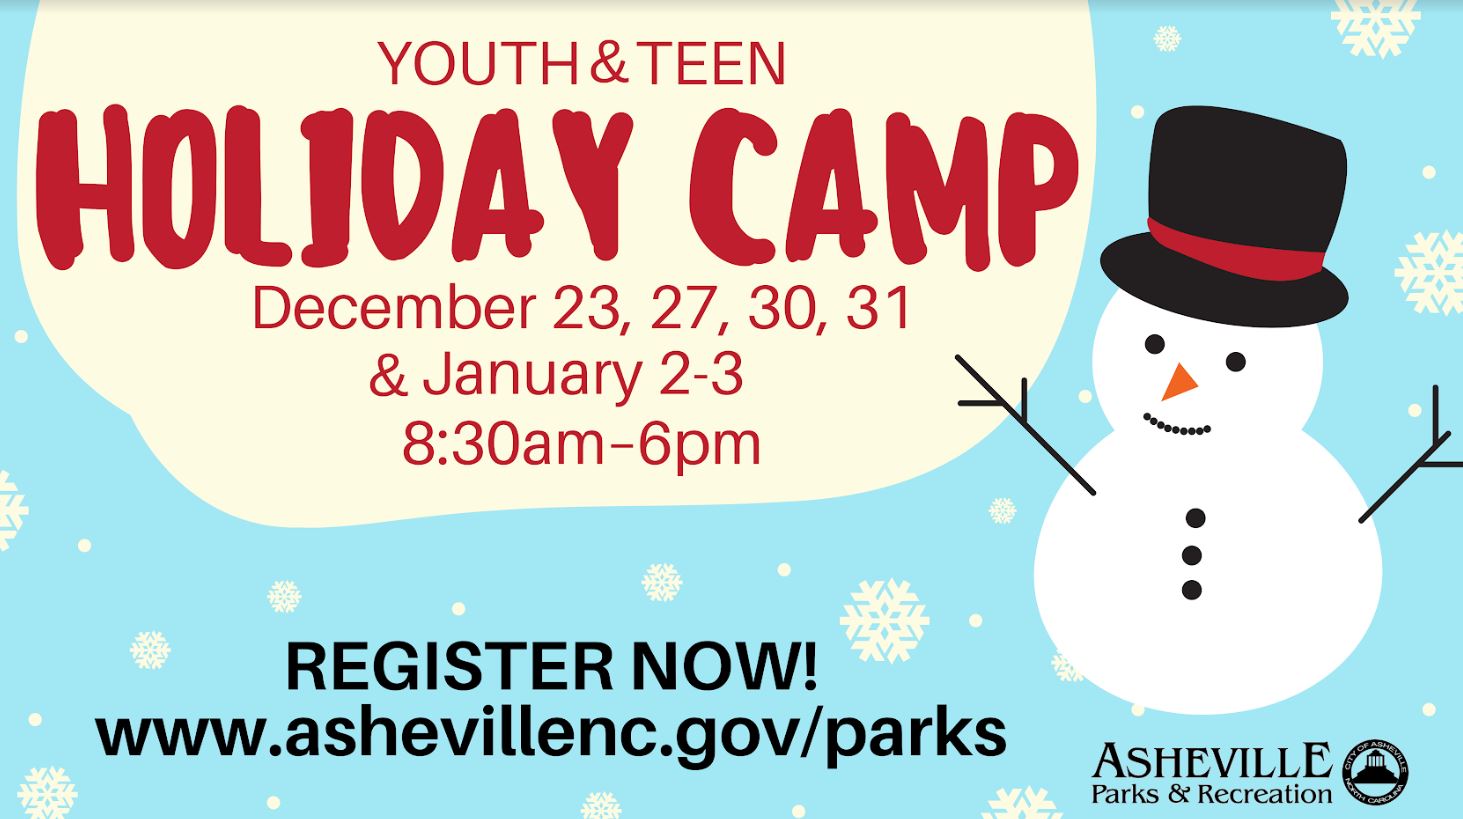 Asheville Parks & Recreation announces Holiday Camp for children and